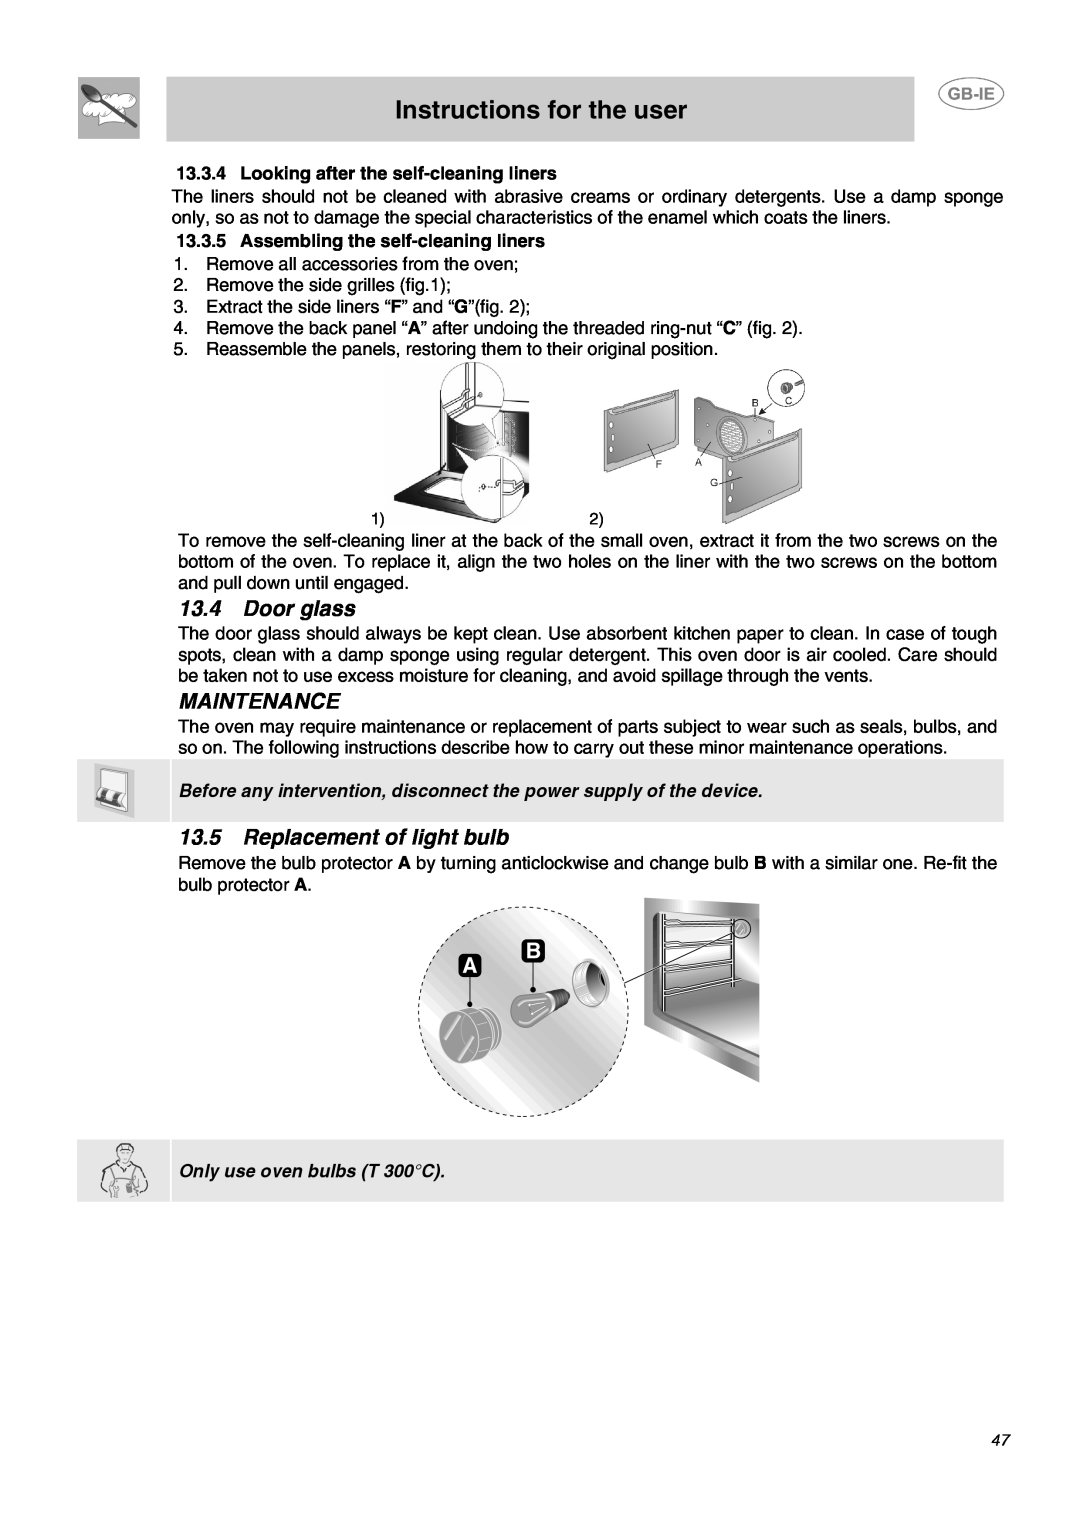 Smeg DO10PSS-5 manual Door glass, Maintenance, Replacement of light bulb, Instructions for the user 